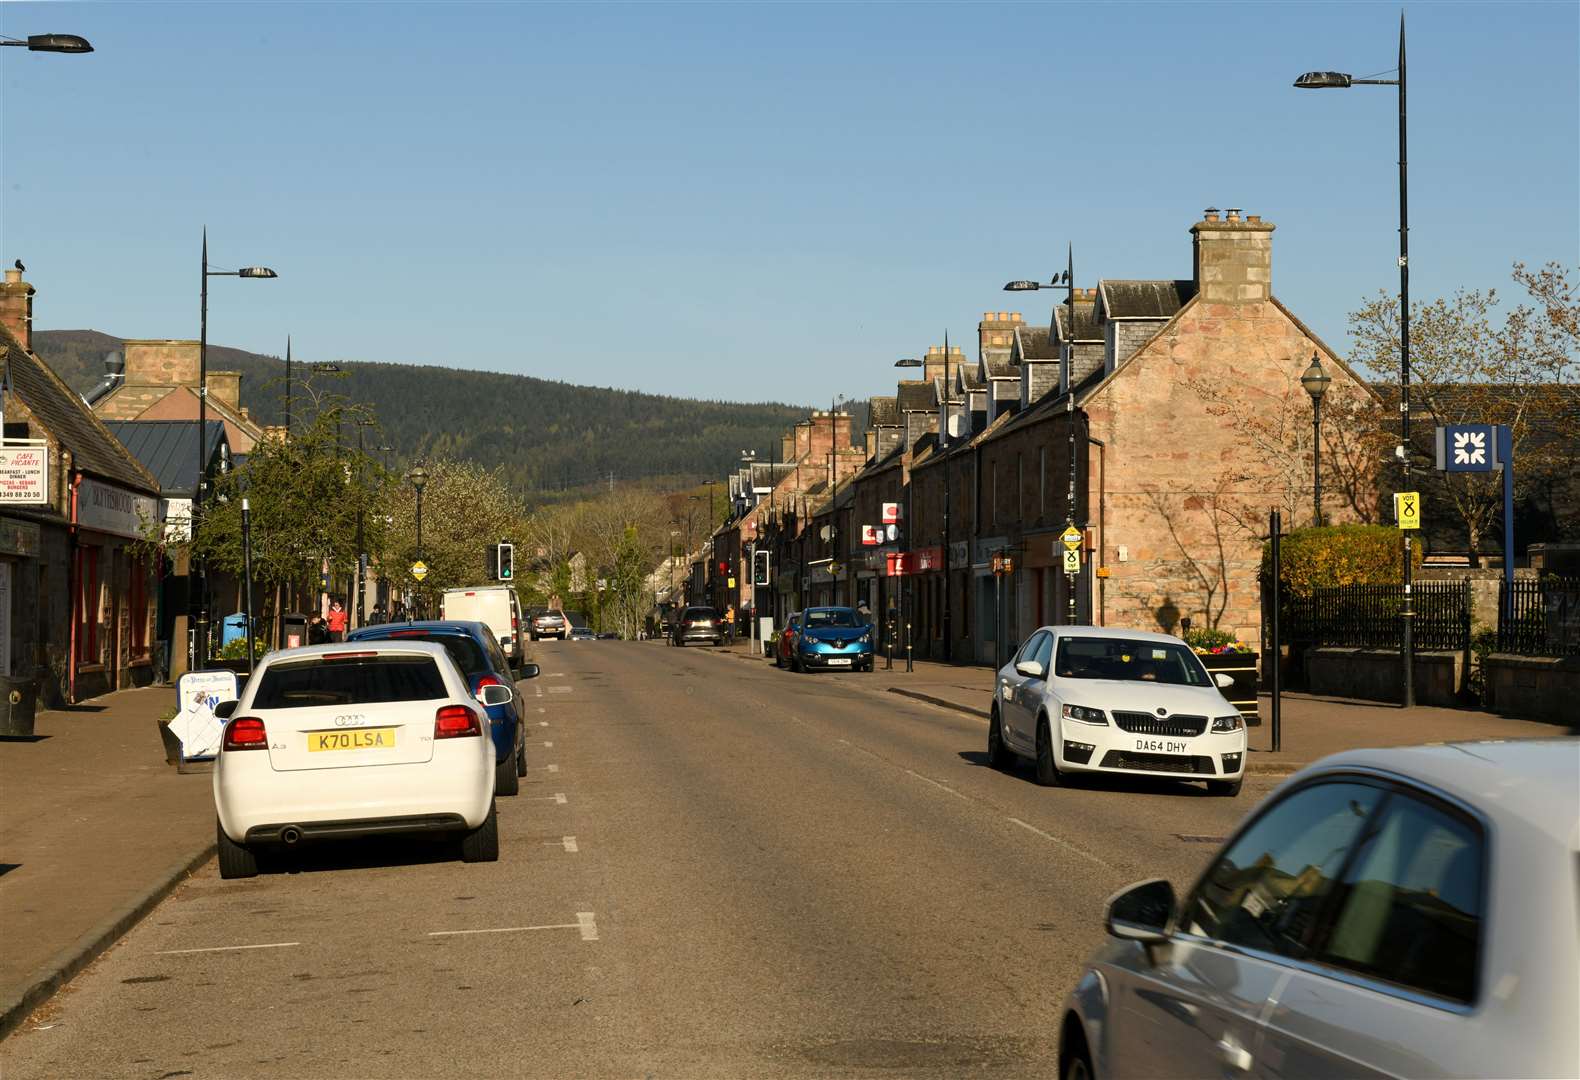 Police Scotland said the alleged incident happened on High Street, Alness, at about 1pm on Monday.